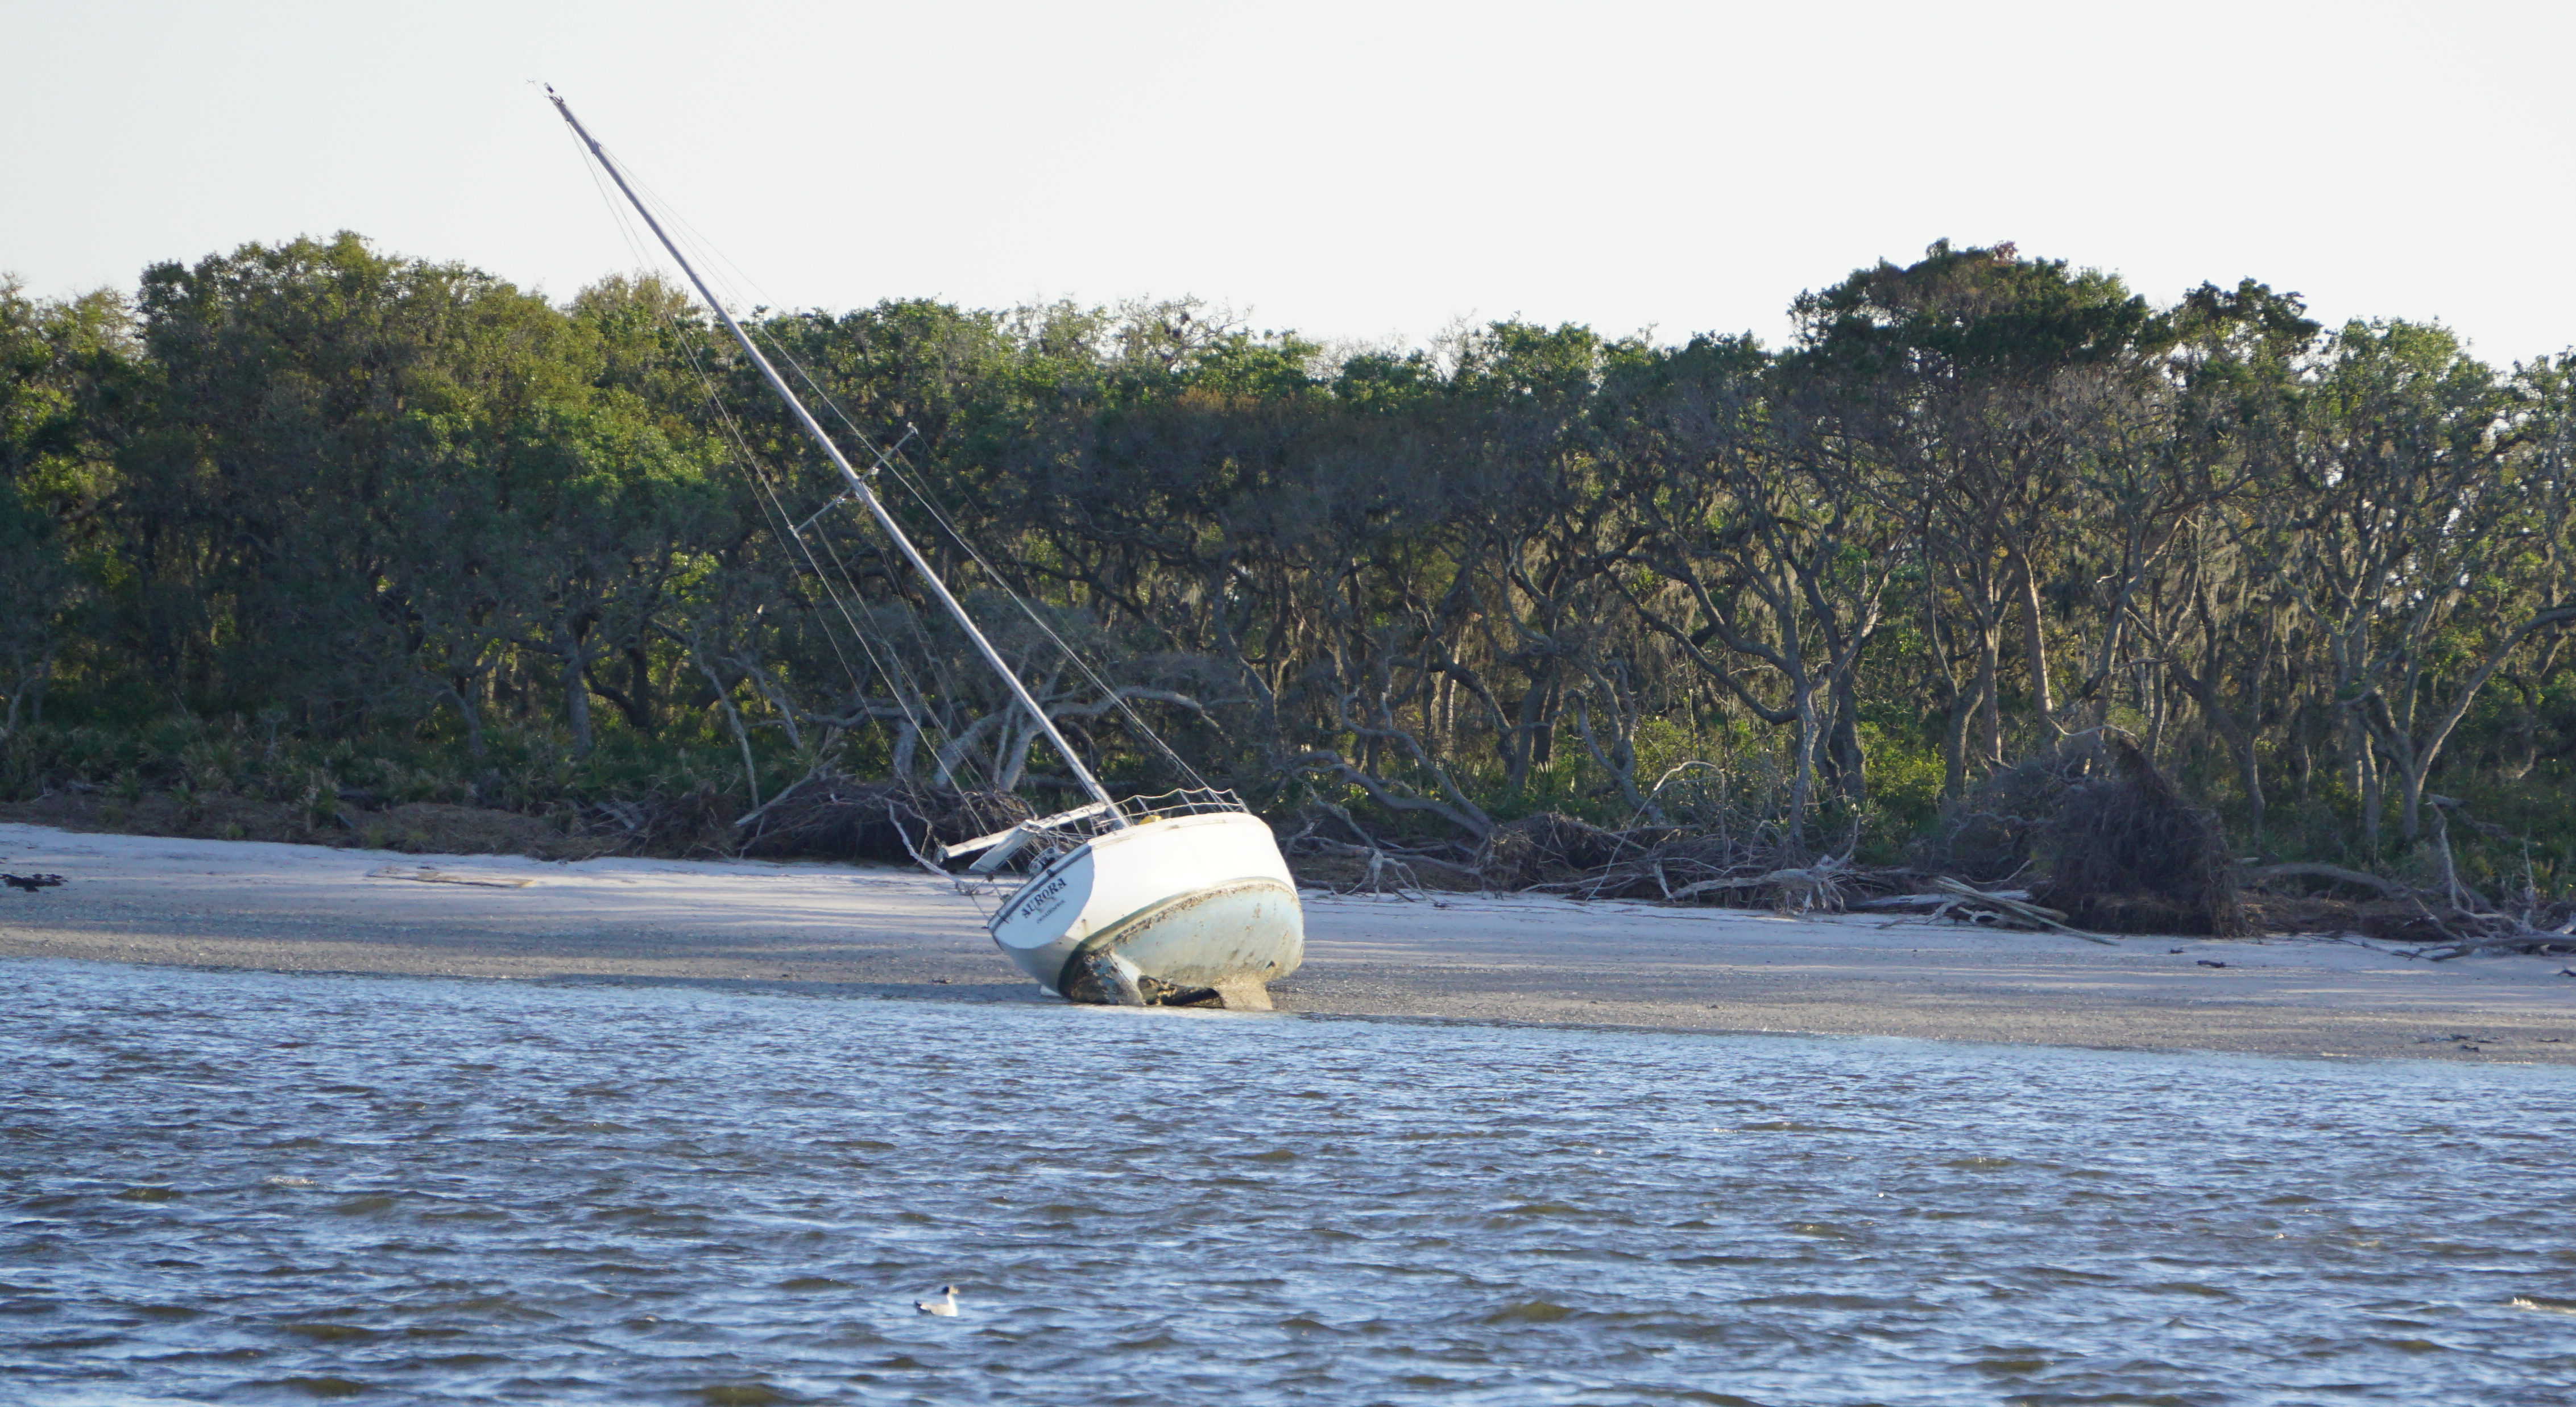 Grounded sailboat from Hurricane Matthew